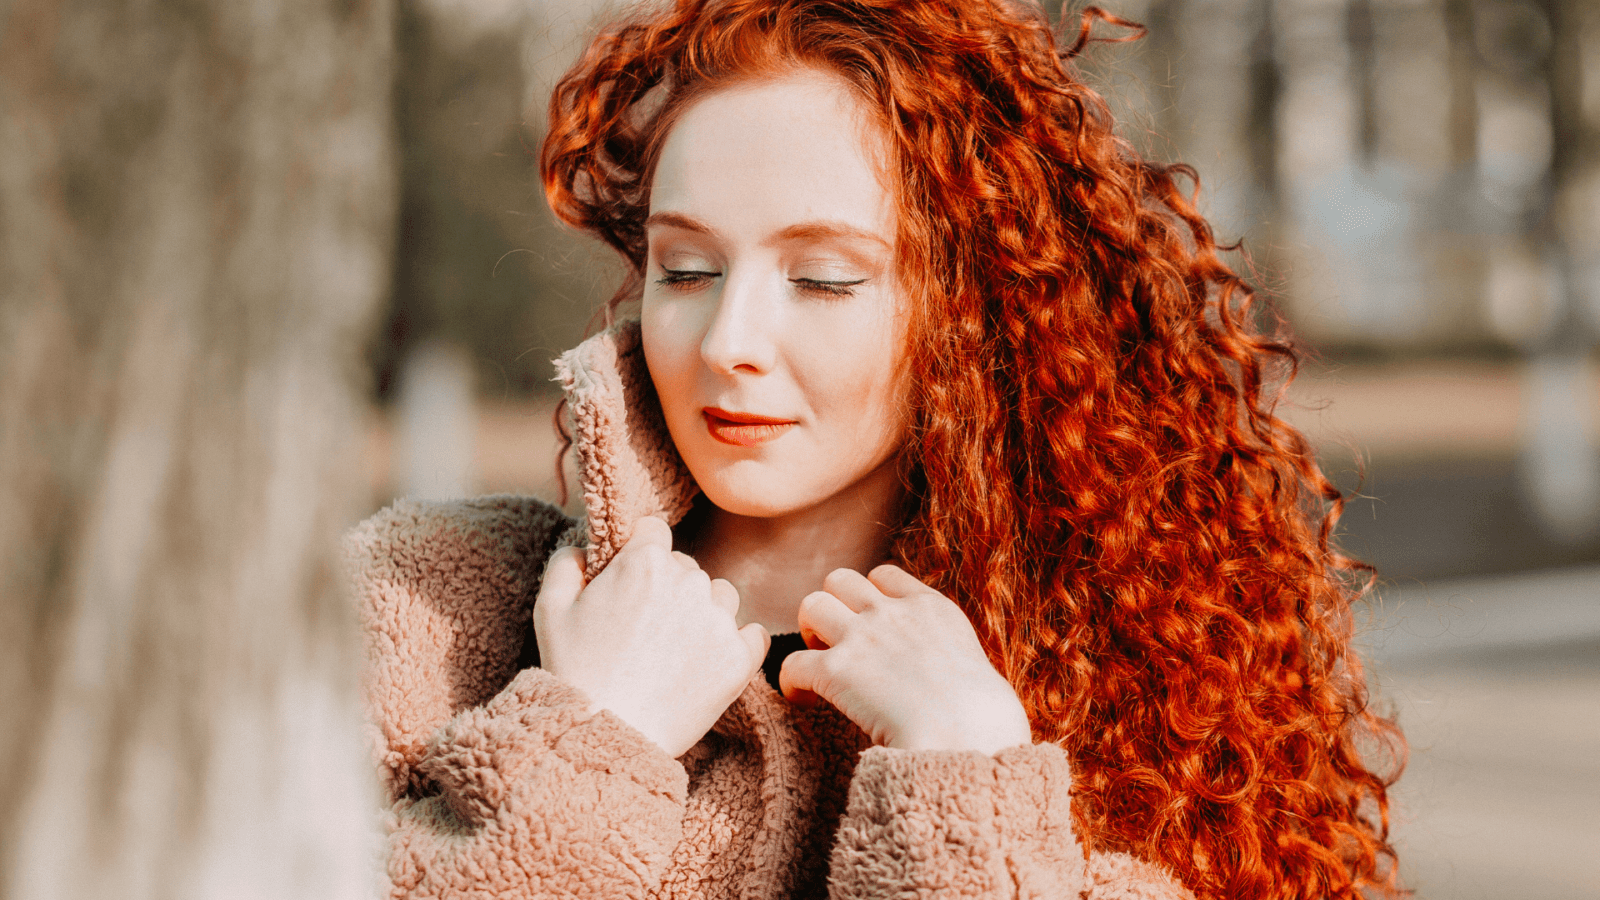 8 Makeup Products That Deliver Glowy Redhead Skin